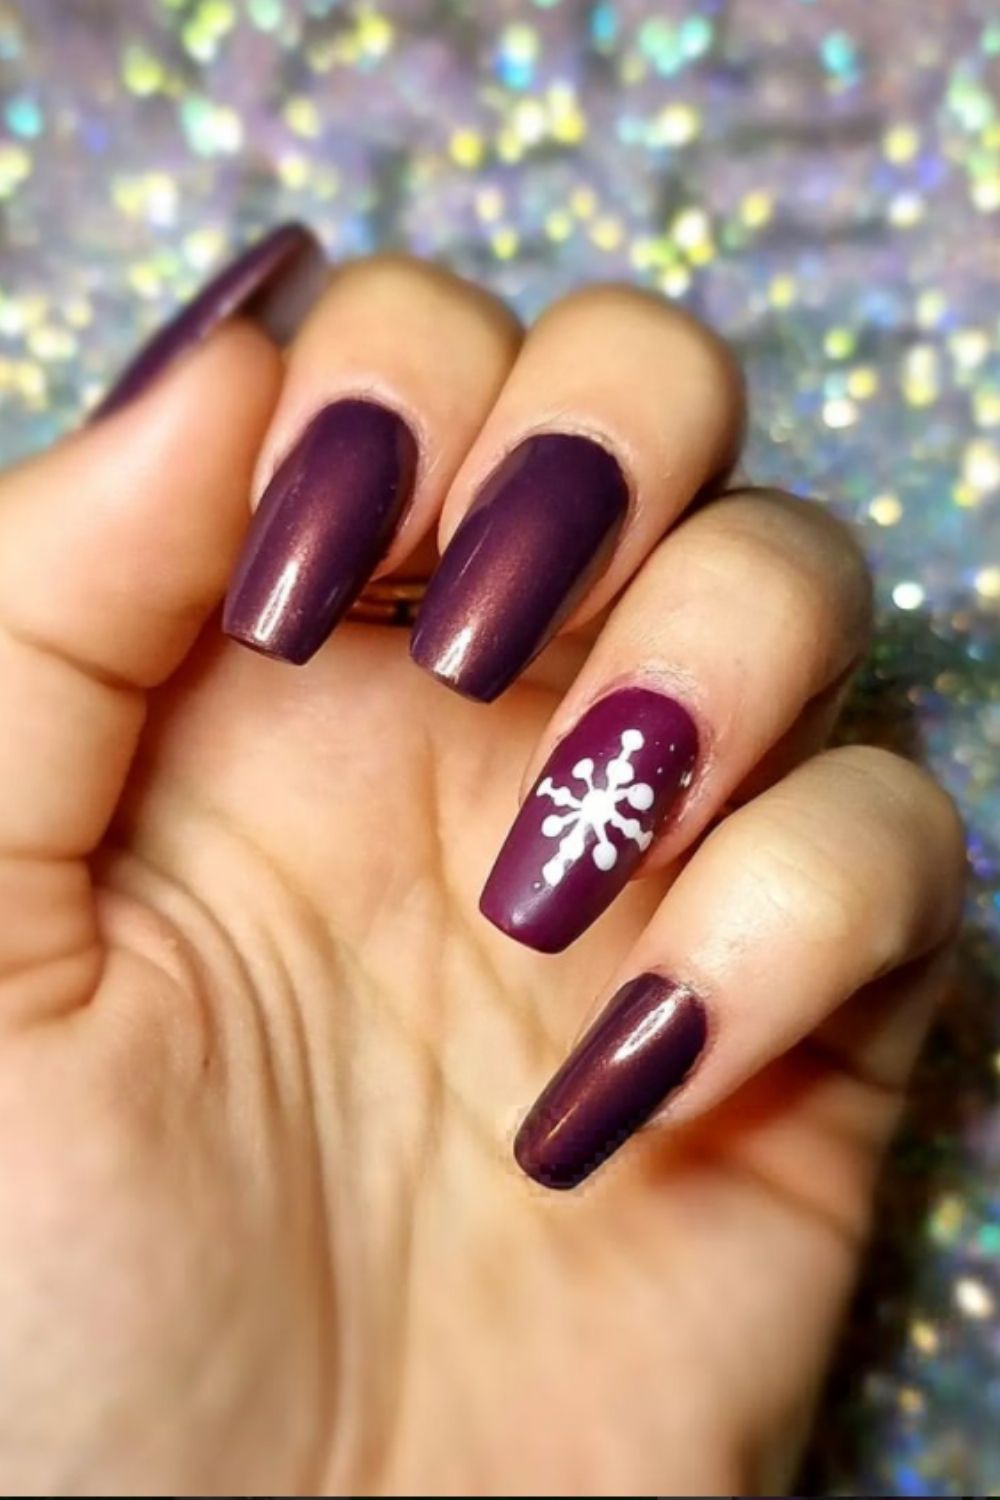 Red square nails art with sonwflake